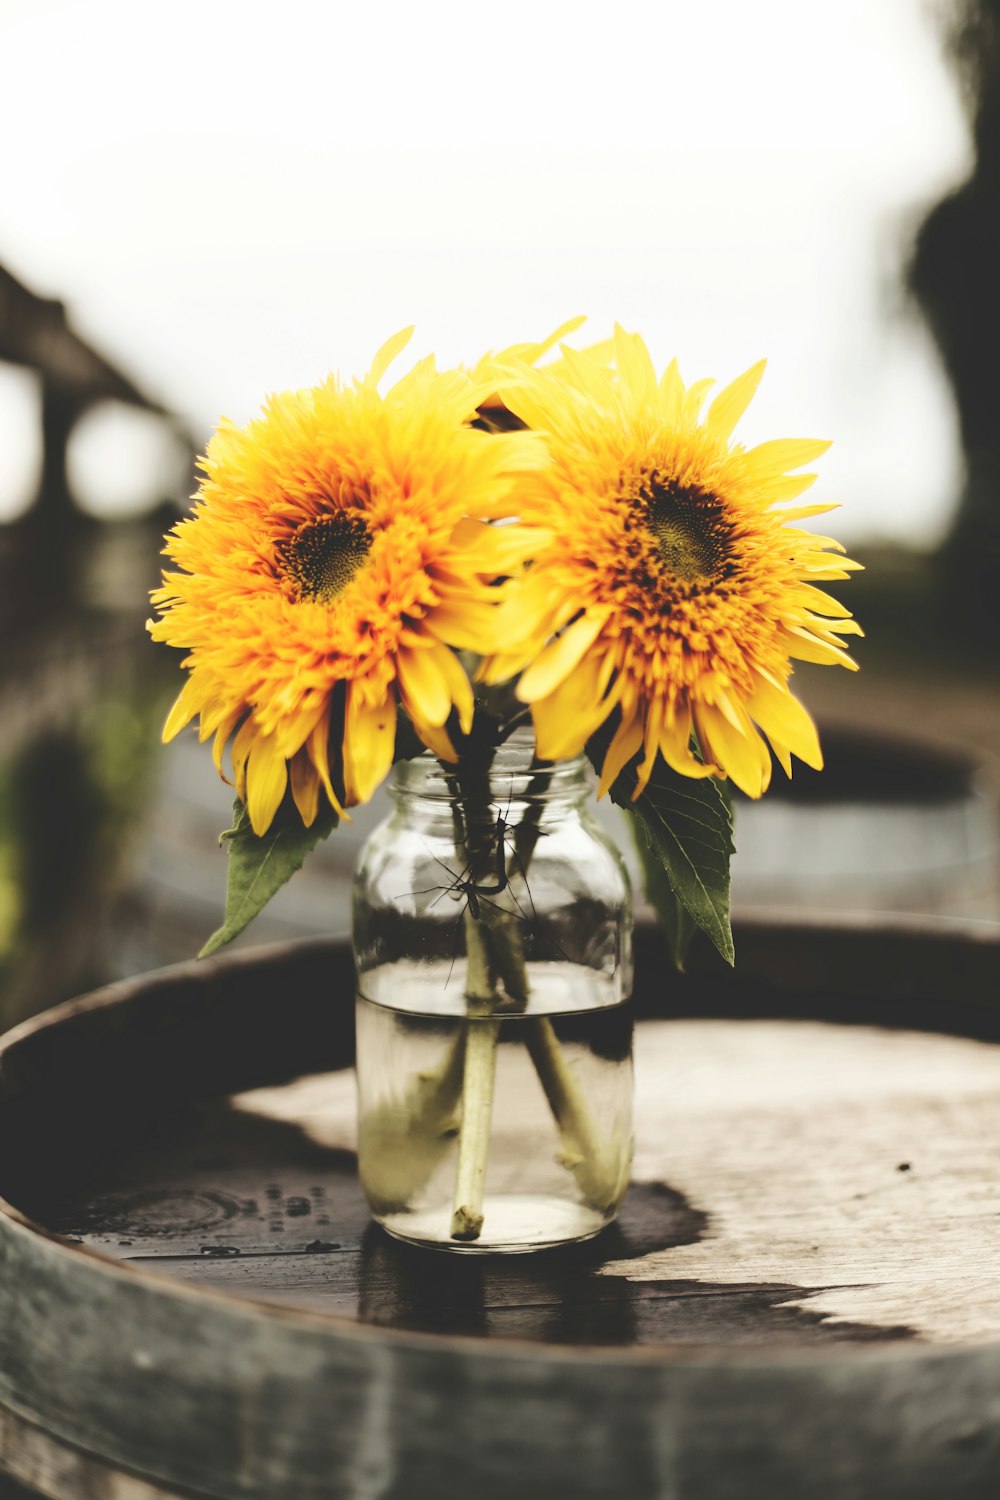 two sunflowers in glass vase with water